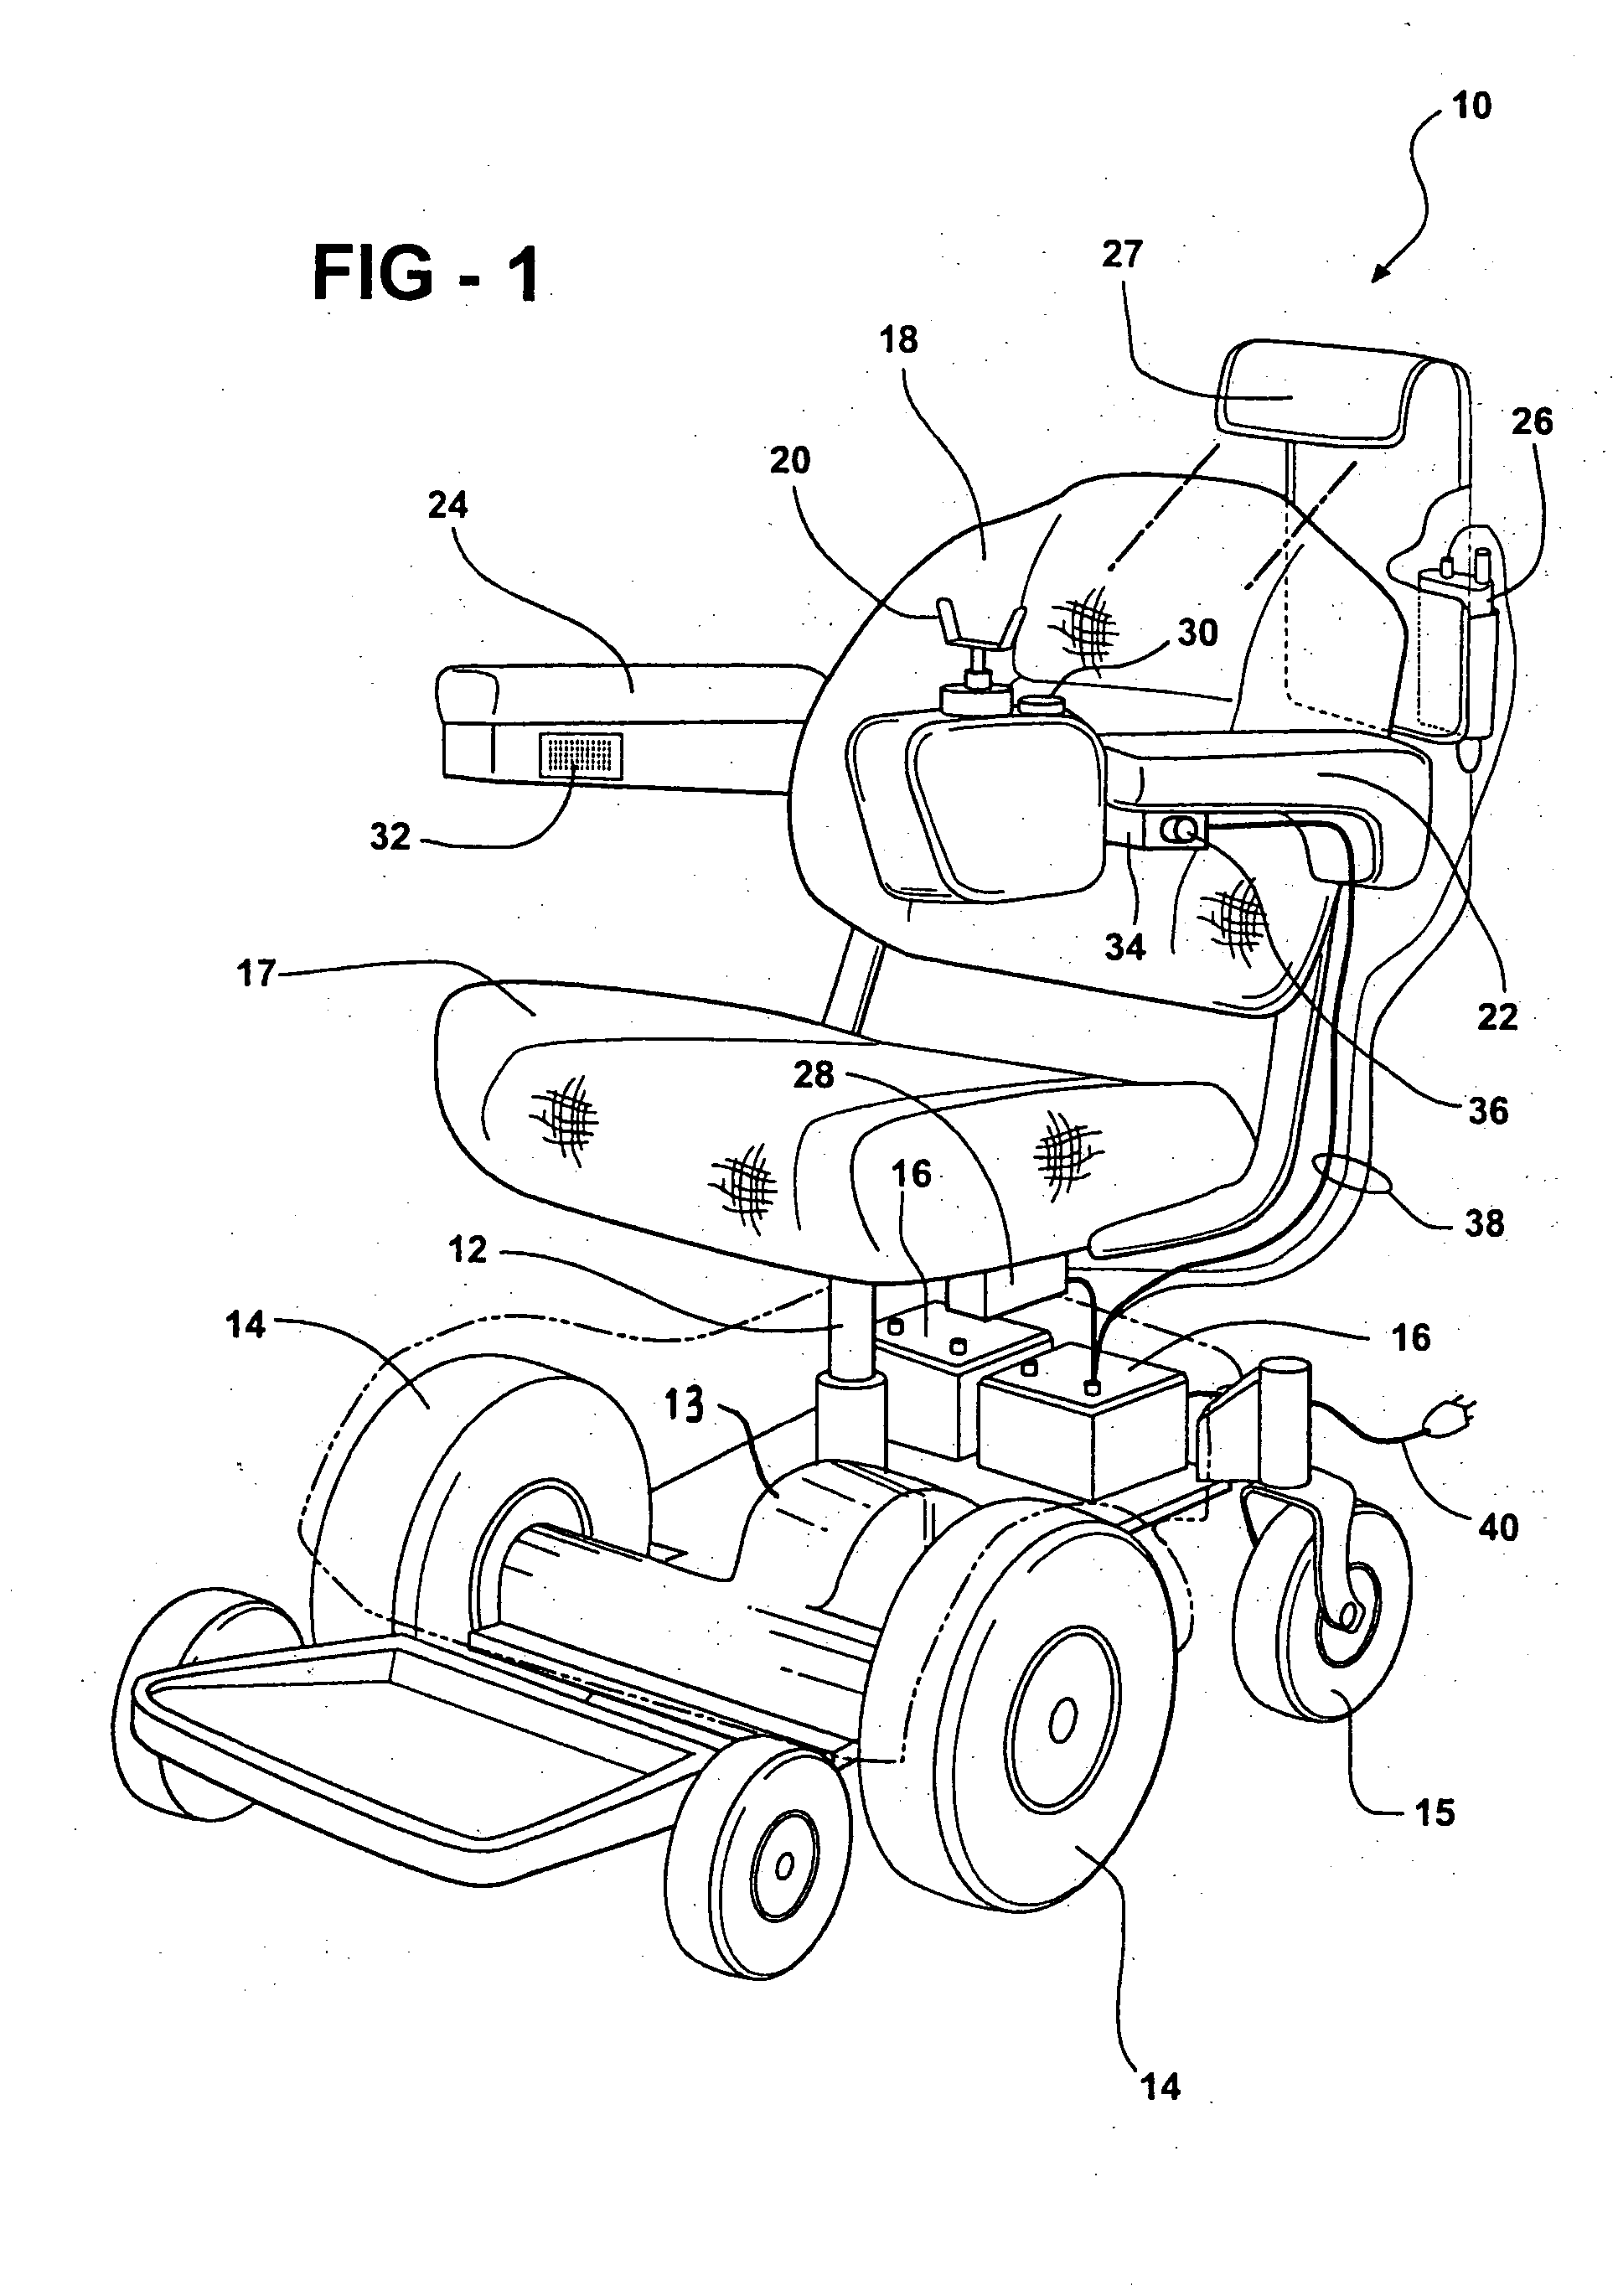 Wireless telephone system for electrically powered wheelchair